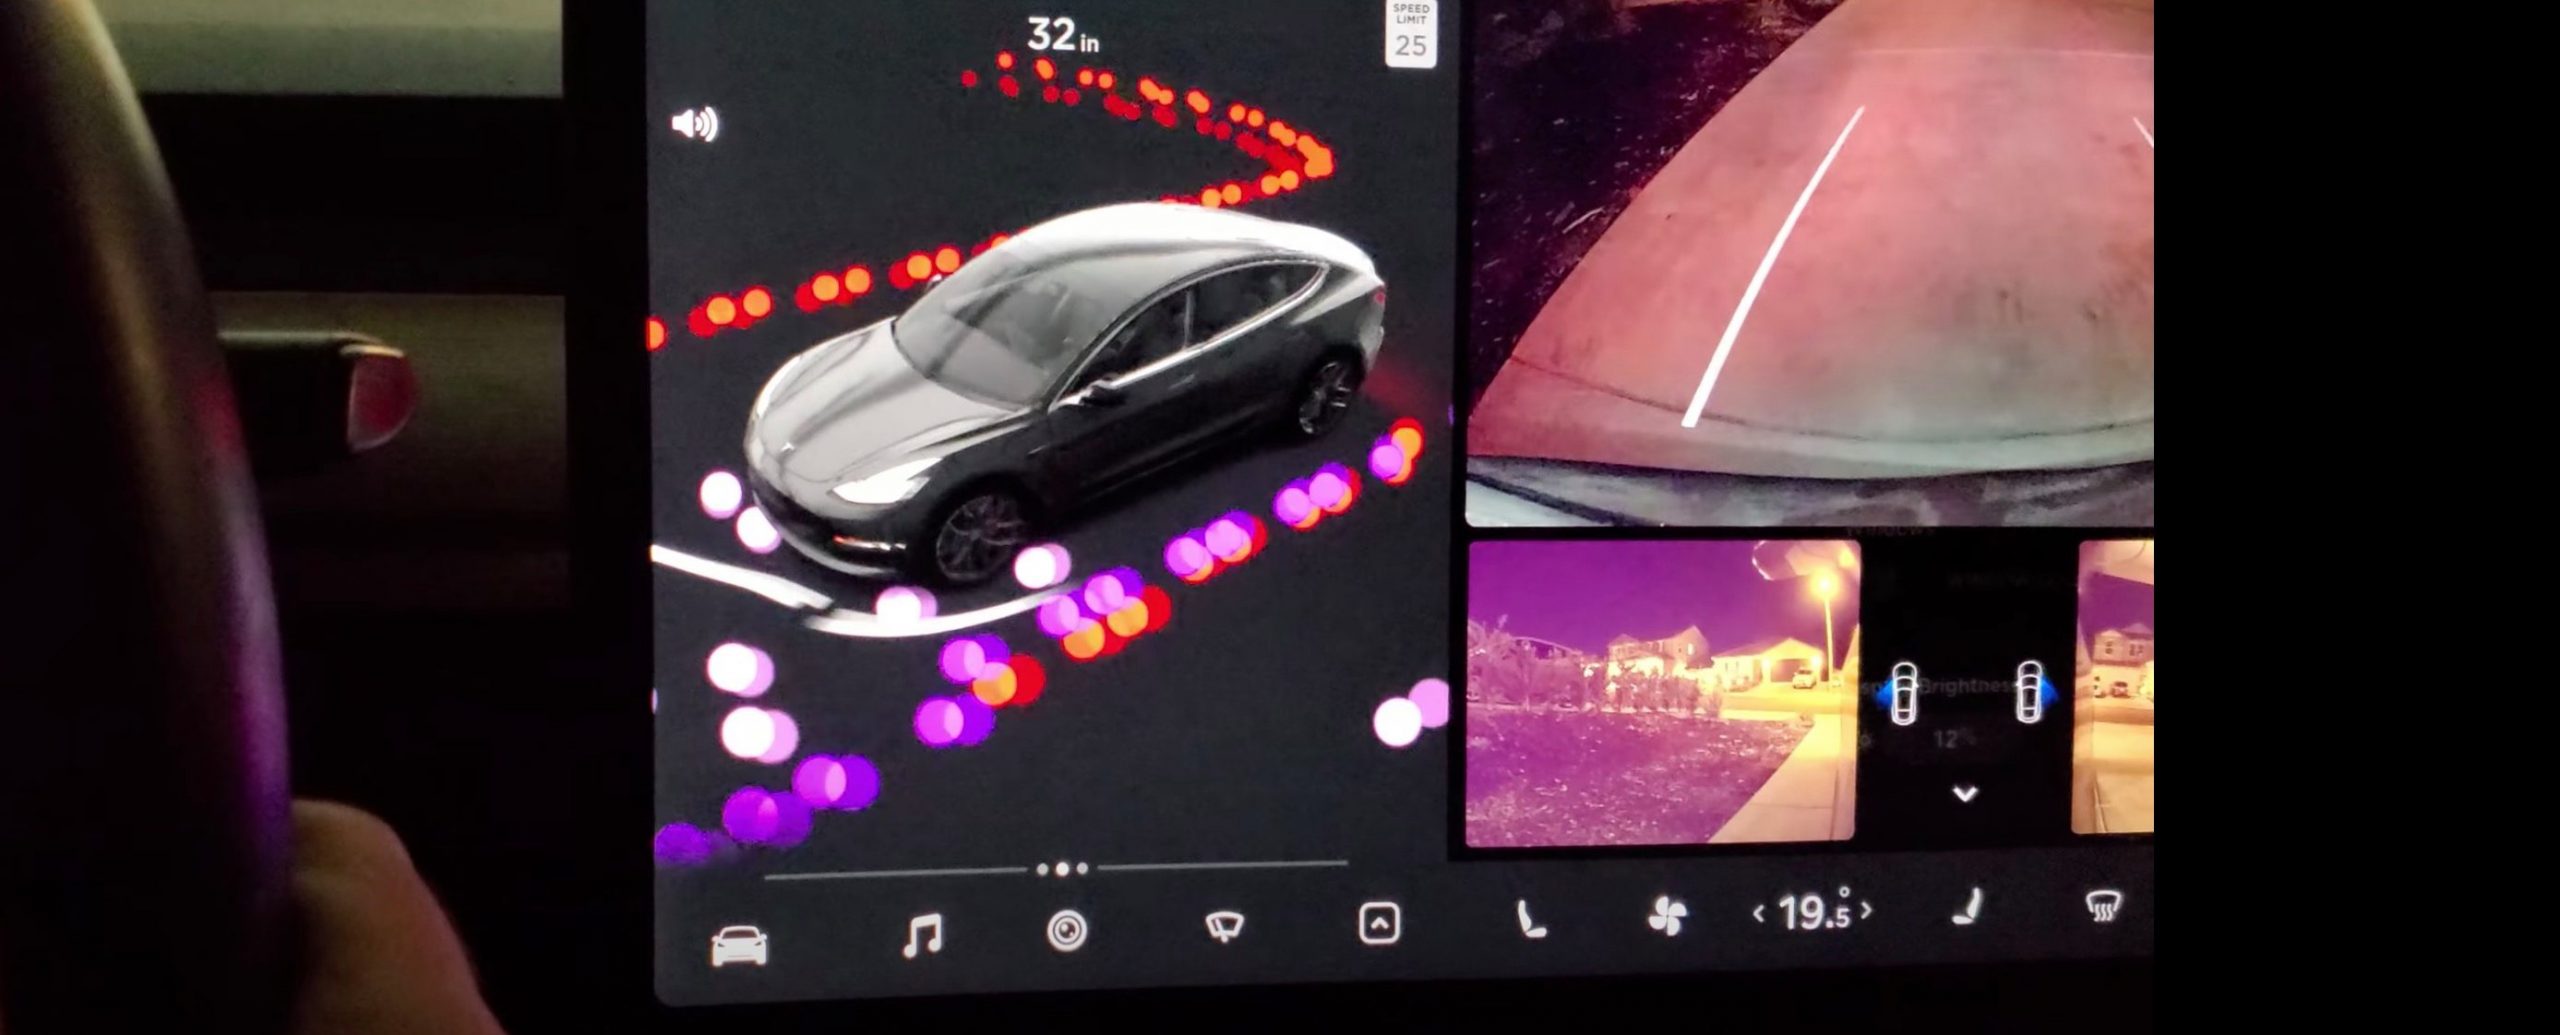 Tesla offers new full-auto beta update, says Elon Musk can reduce interventions by a third